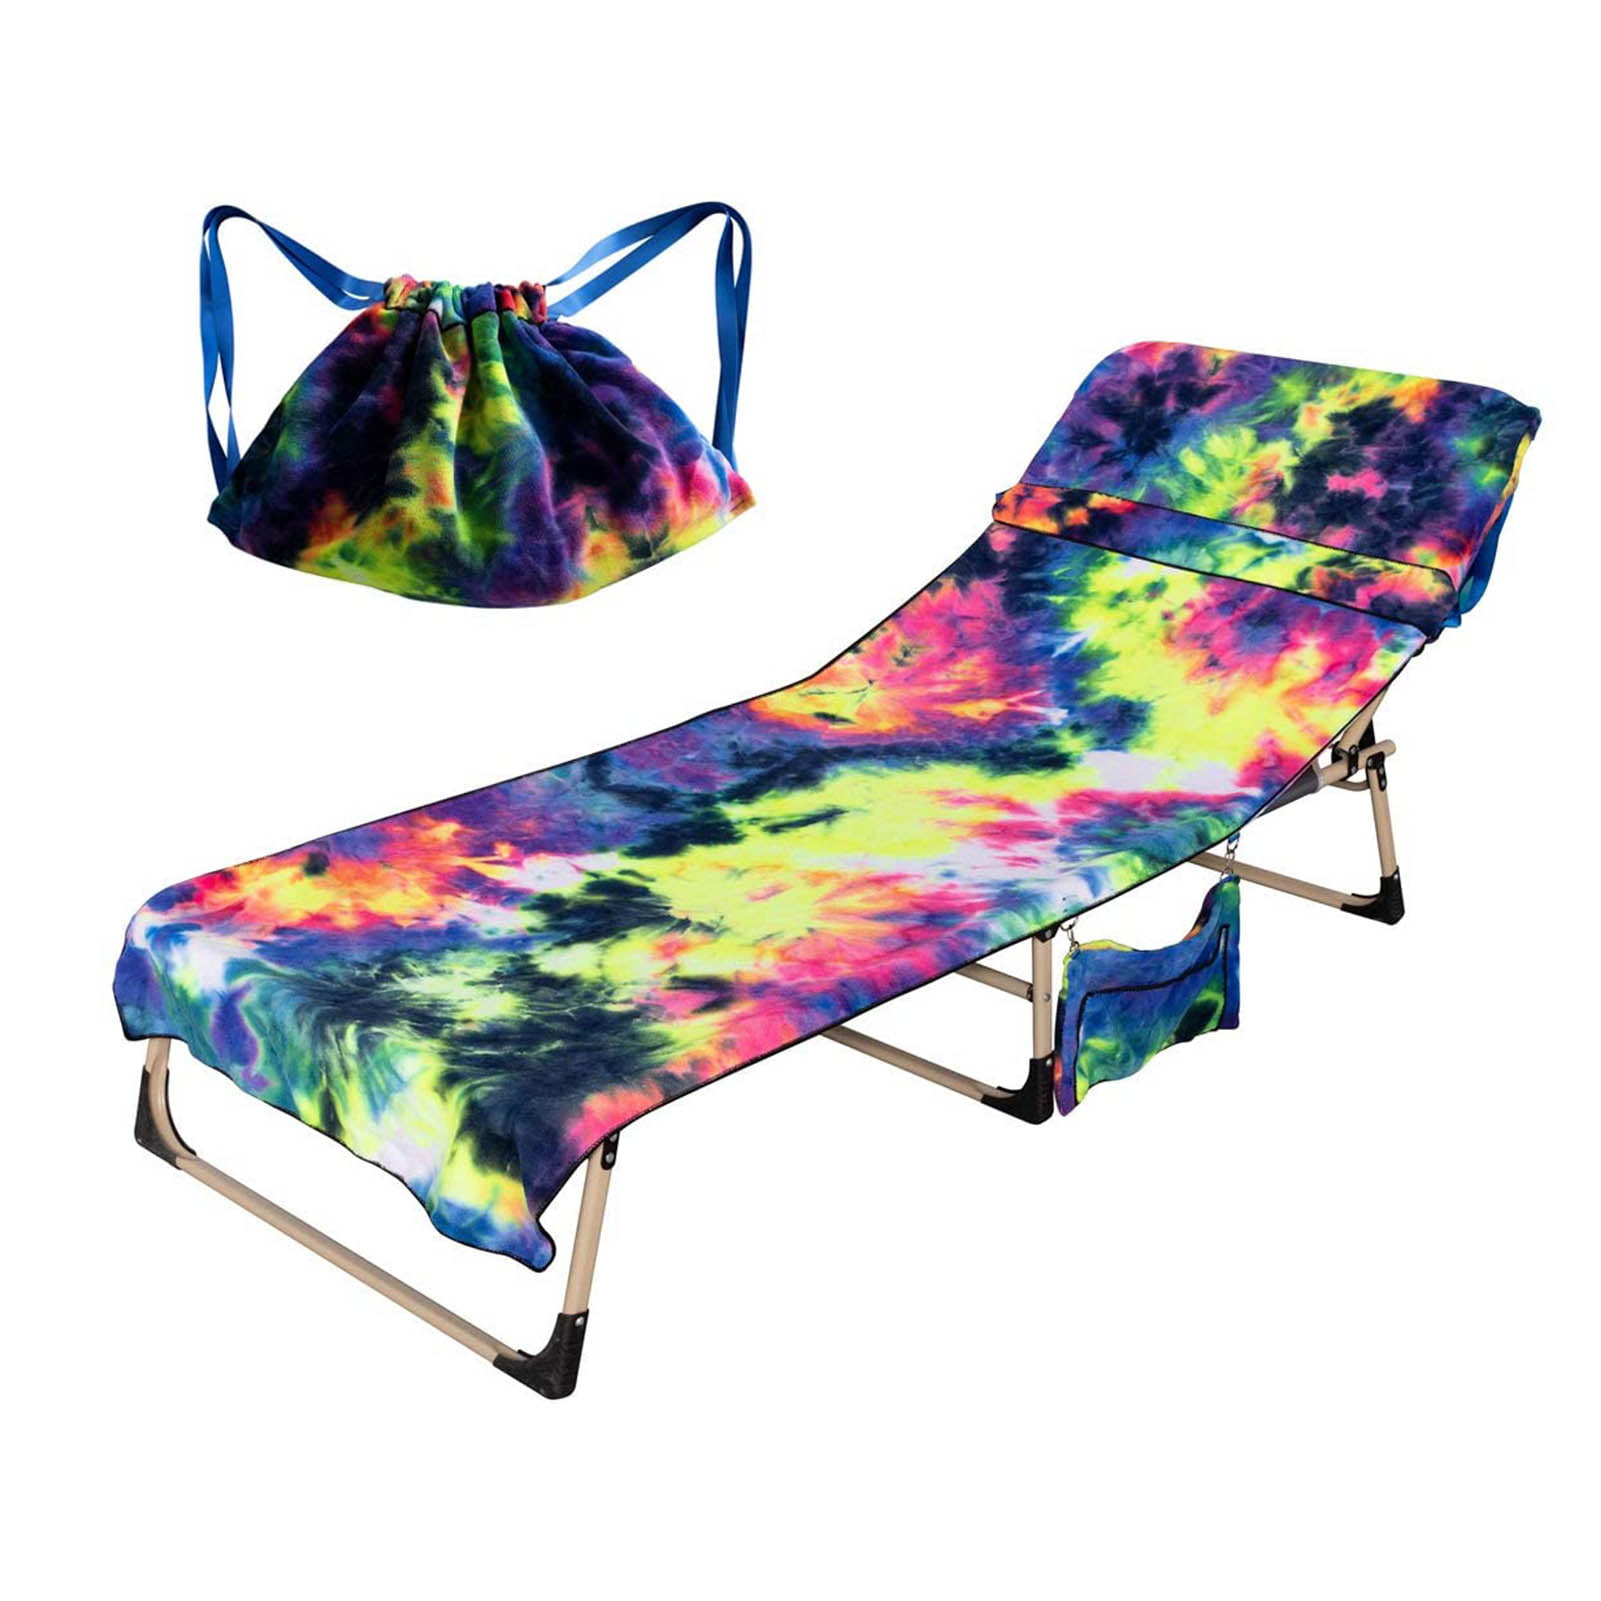 Oversized Green Tie Dye Beach Chair Towel with Side Pockets 82.7 x 29.5 Inches Green Microfiber Colorful Chaise Lounge Towel Cover for Sun Lounger Pool Sunbathing Garden Beach Hotel 